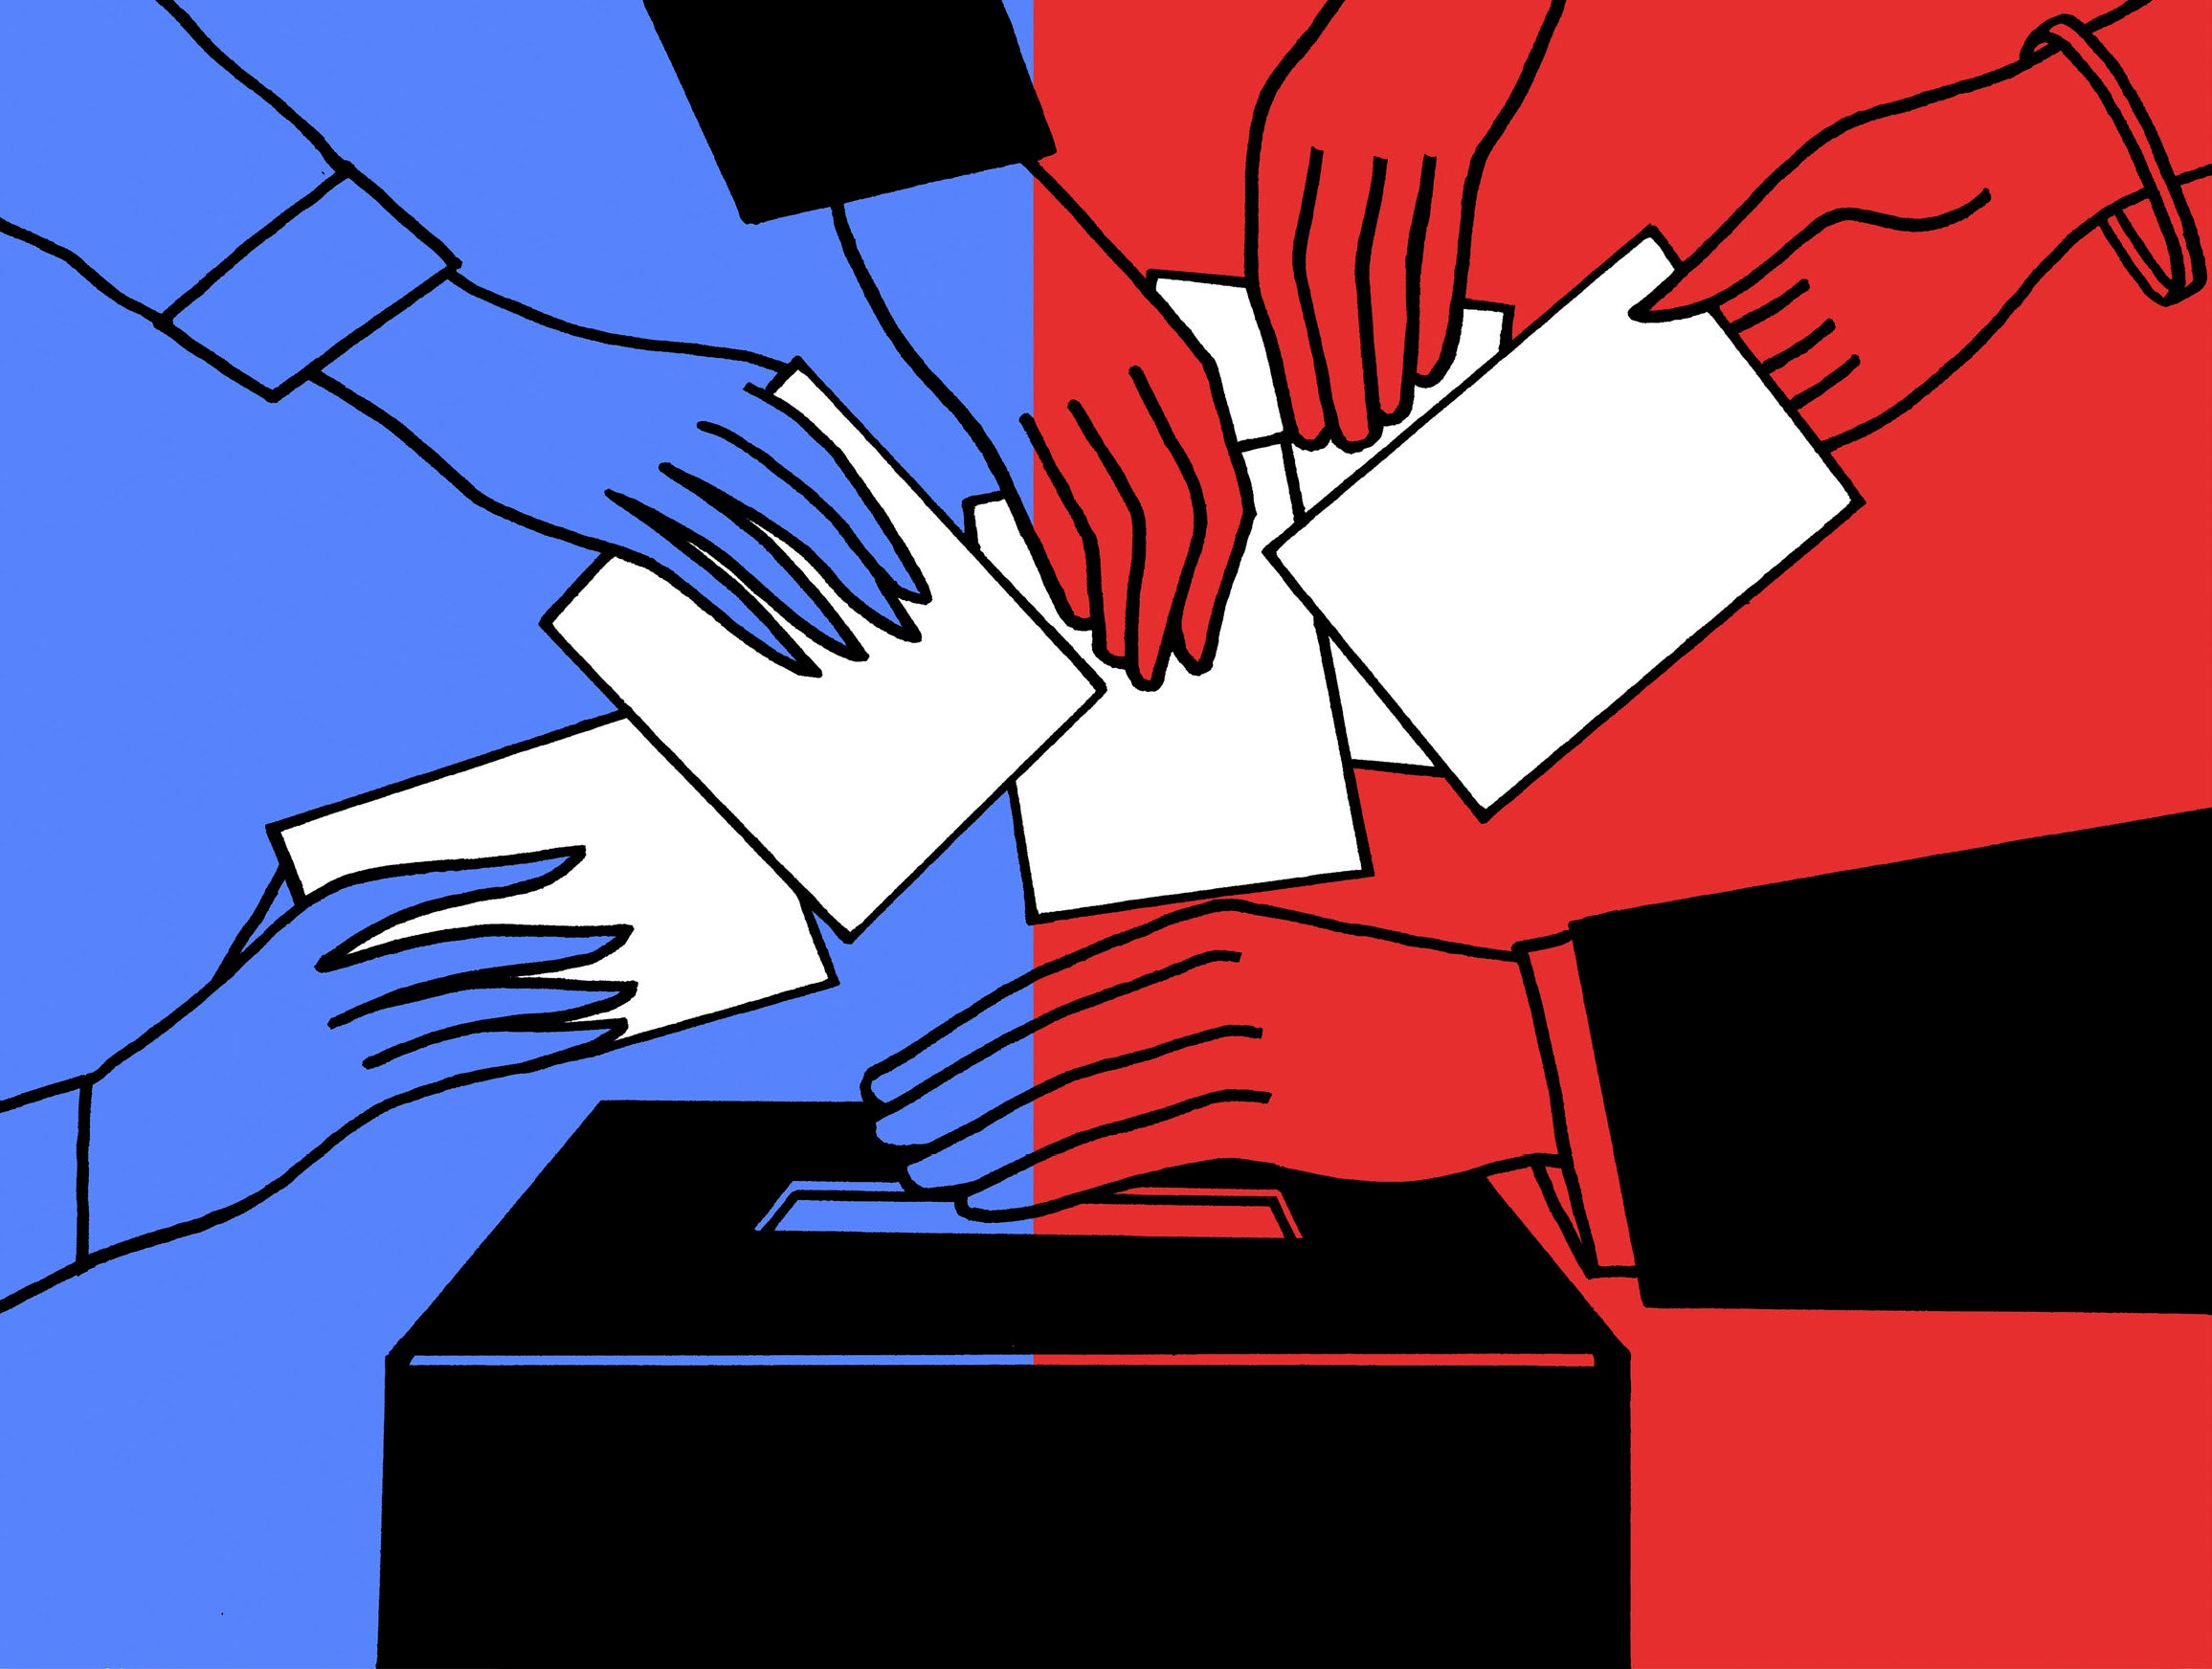 Red and blue colored hands holding ballots ready to drop in a black ballot box at the center of the illustration.